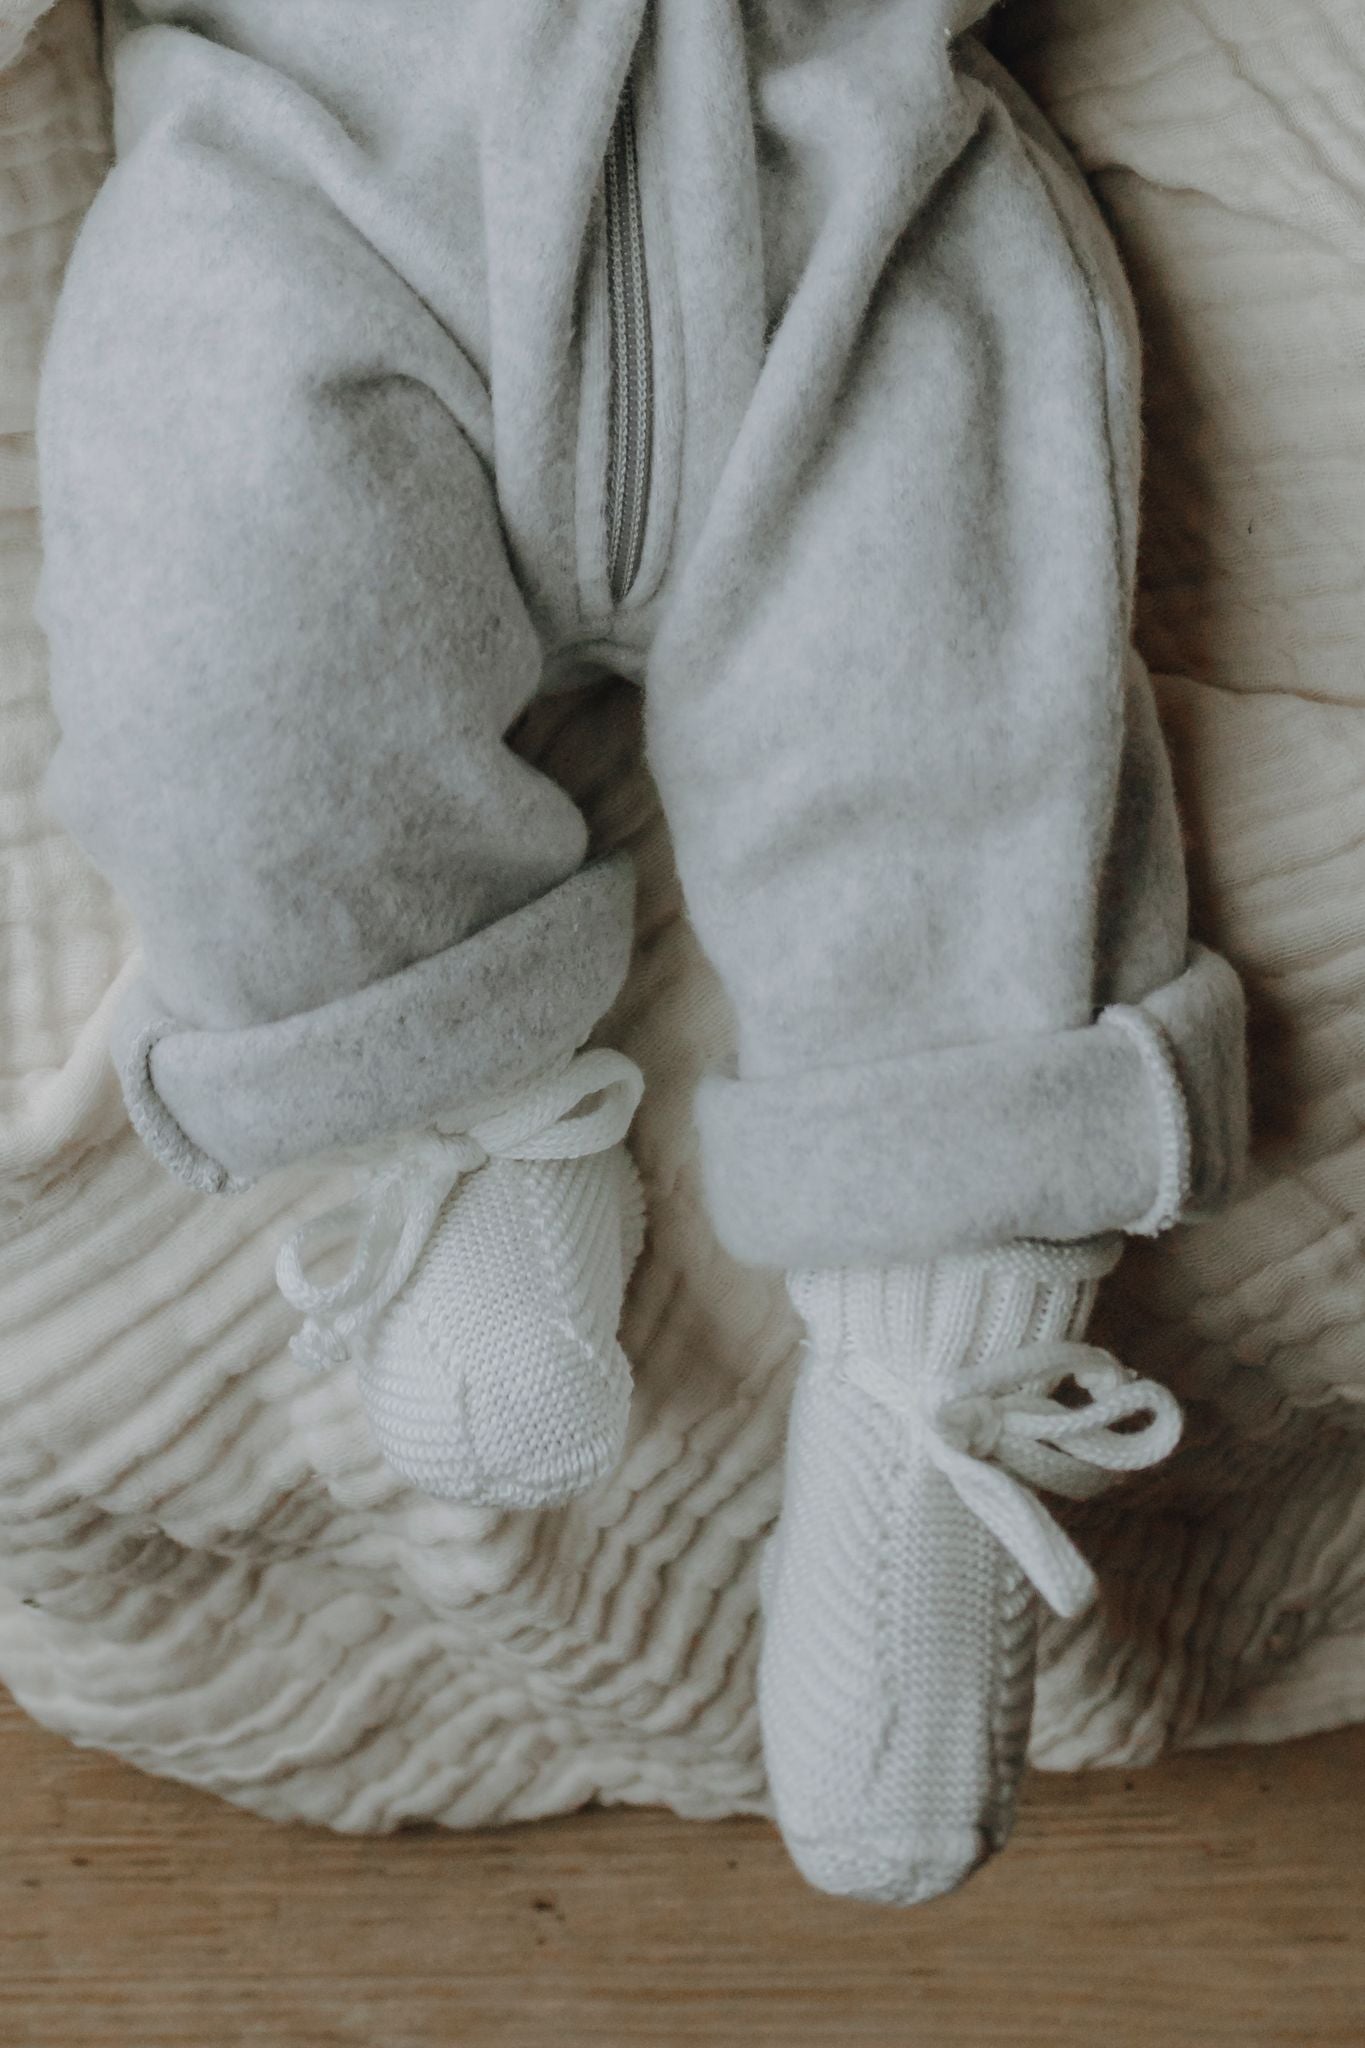 BABY KNIT SHOES MILK